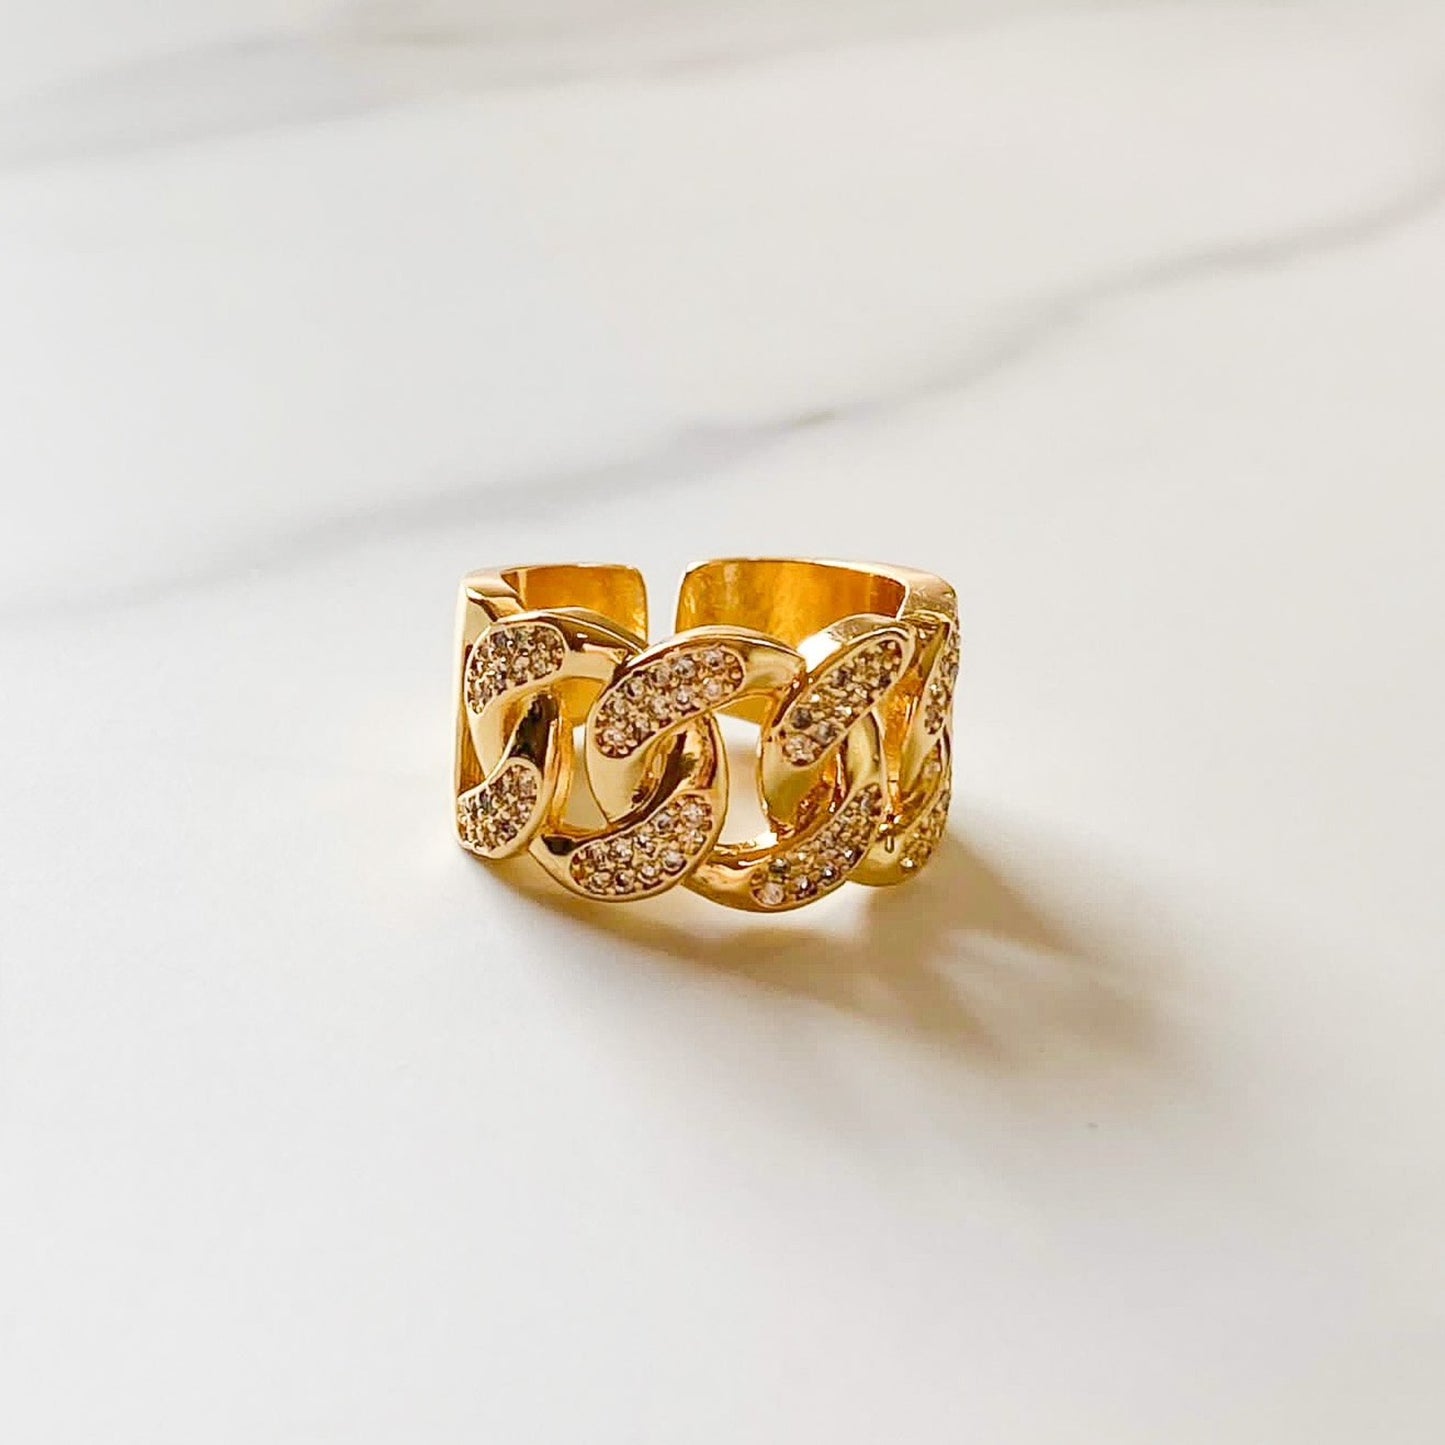 Lucy gold-filled ring, Sold by ISVI Boutique Miami. Adjustable, water-resistant, made in Brazil. 